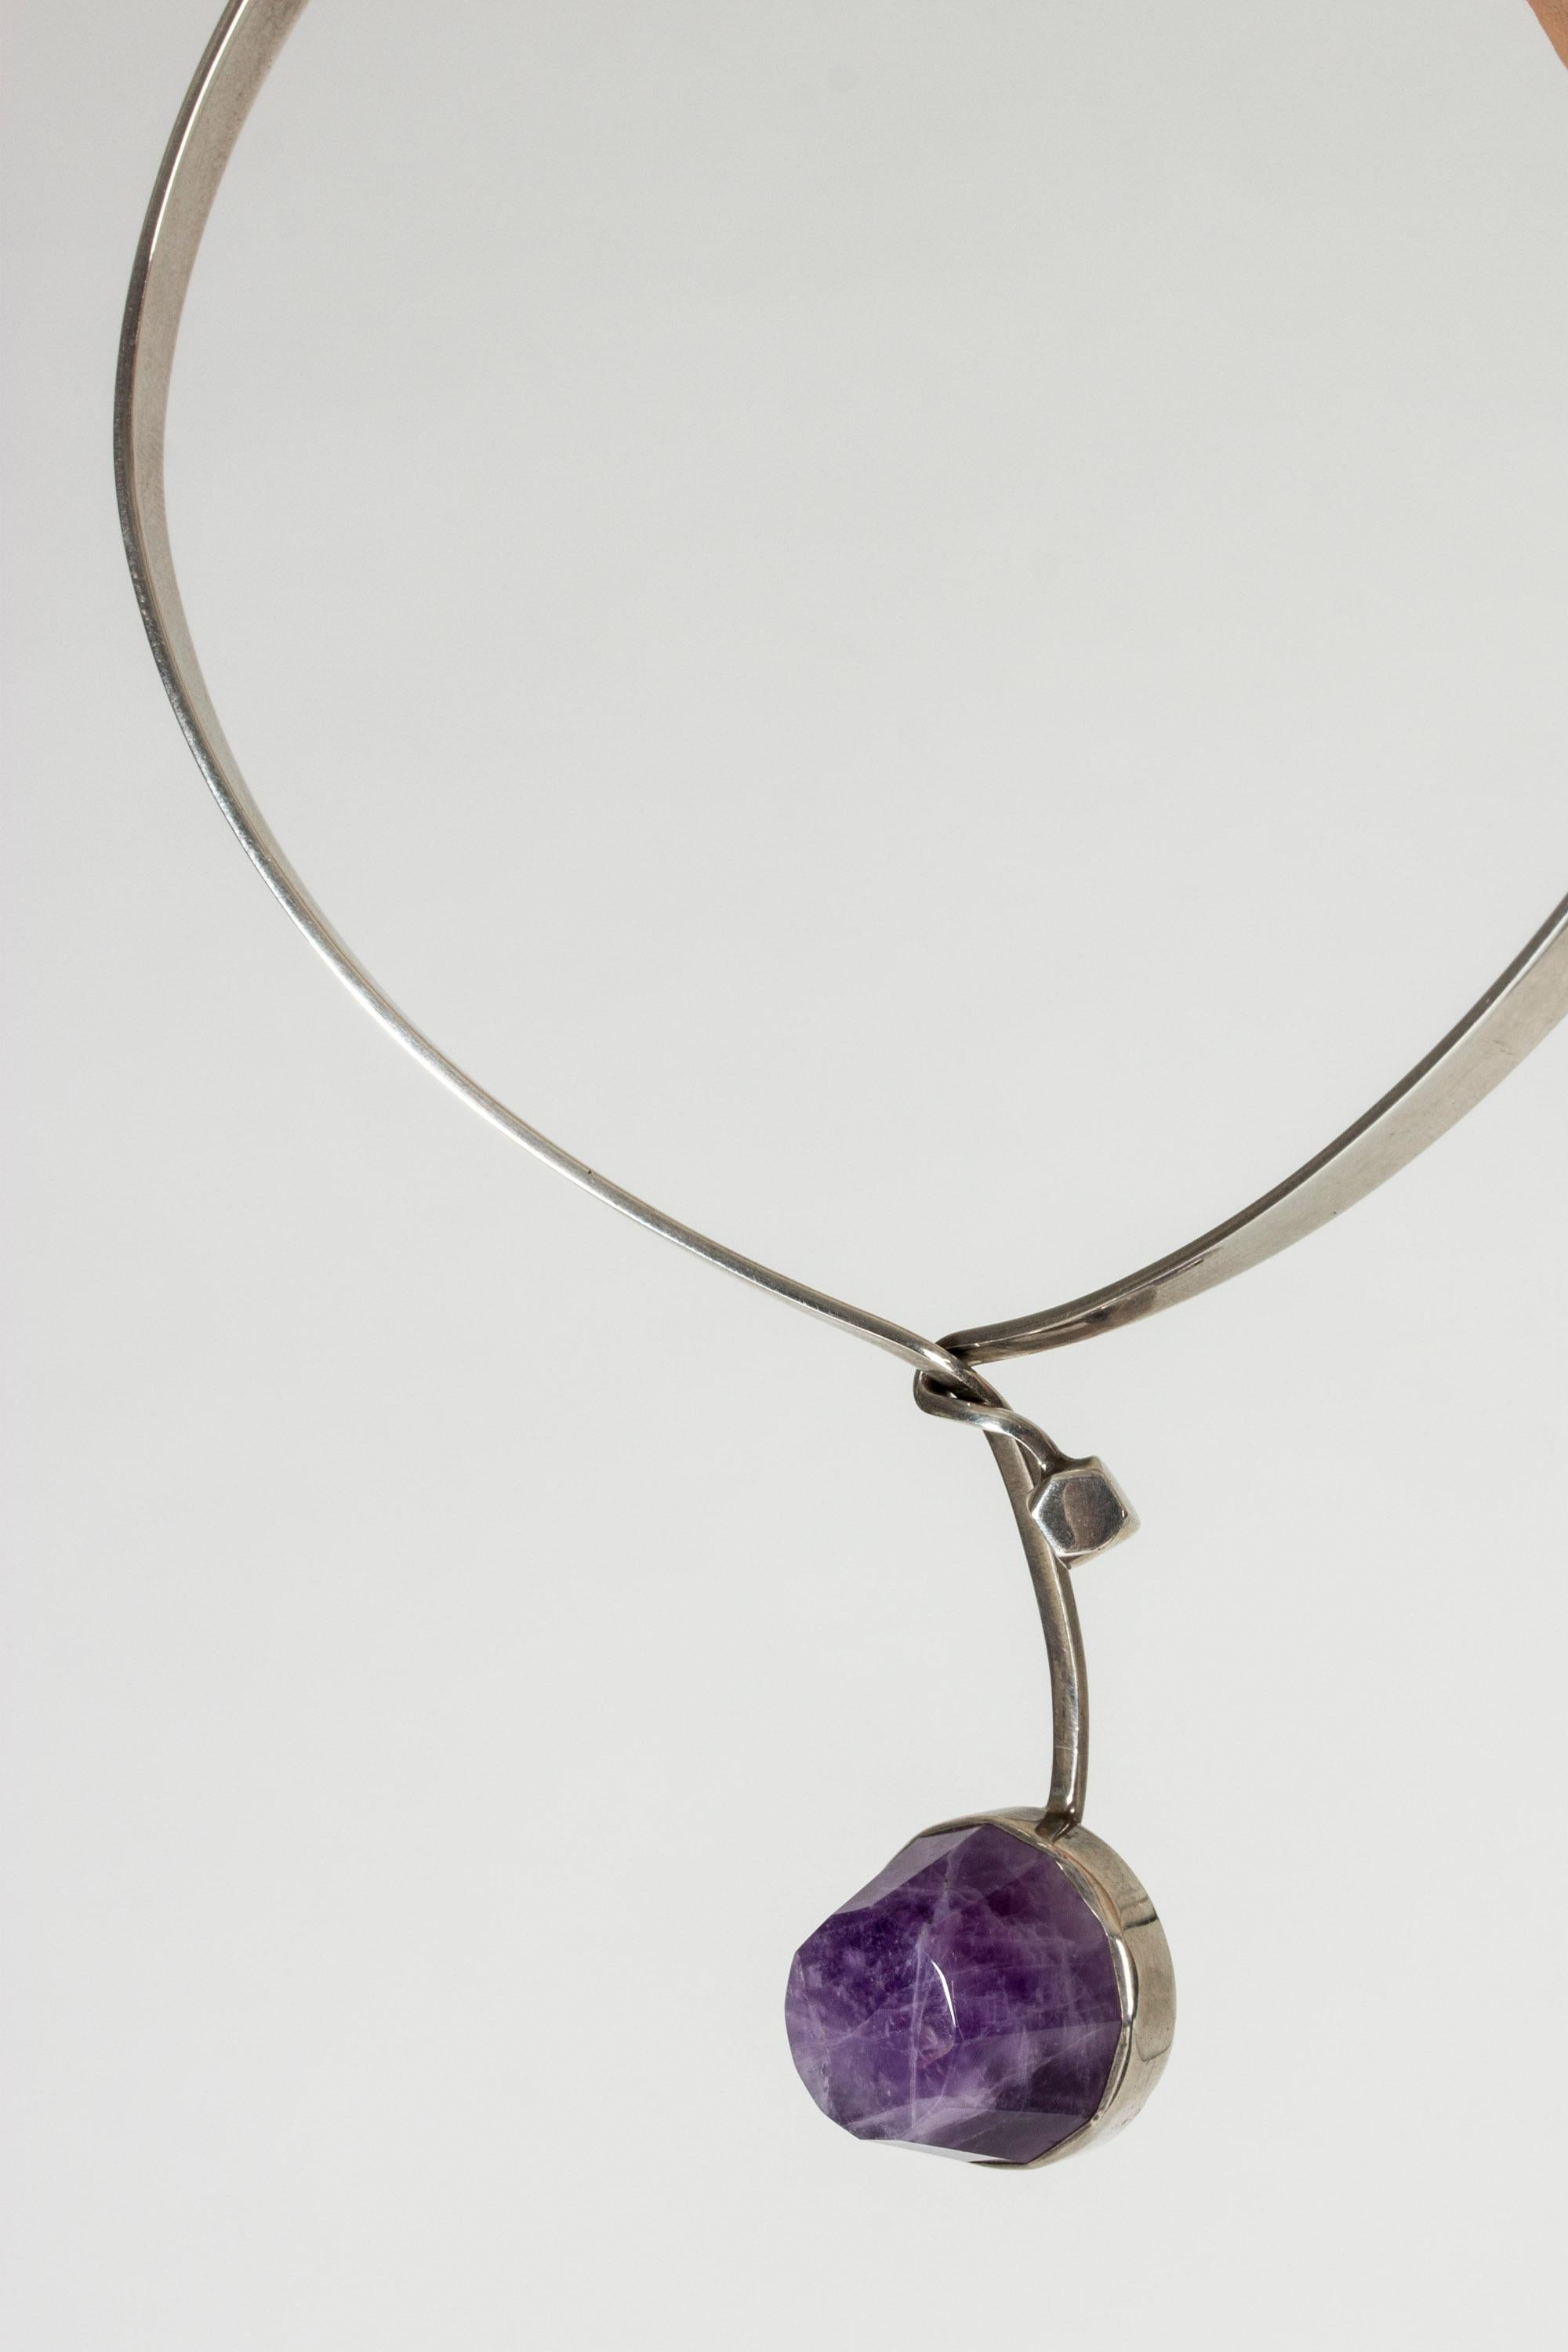 Beautiful silver neckring by Malmö silversmith Gert Thysell. Jeweled with a large amethyst stone with a very original cut, nicely designed opening with the neckring twisting around itself.